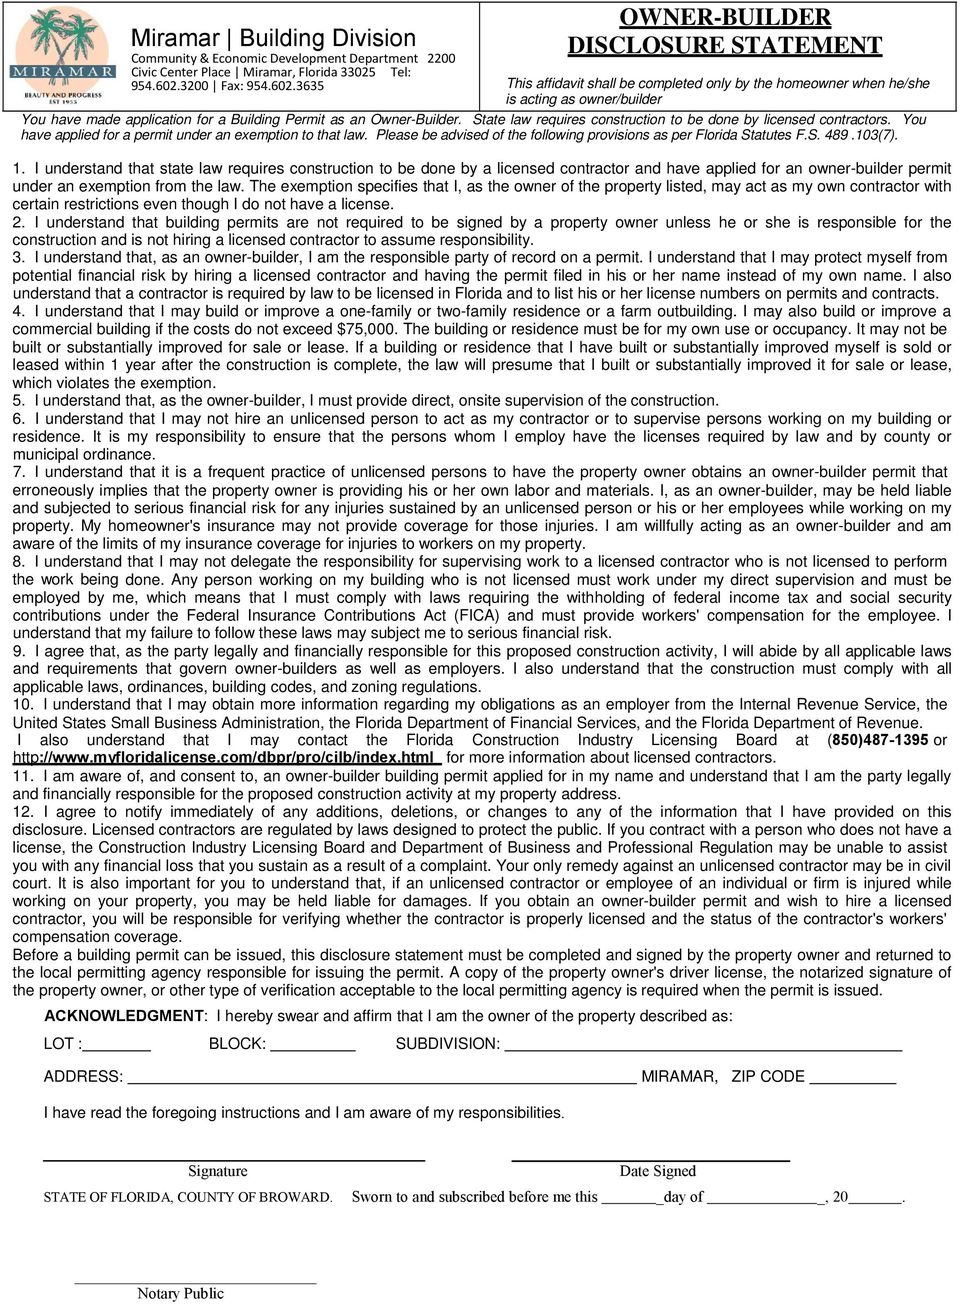 3635 OWNER-BUILDER DISCLOSURE STATEMENT This affidavit shall be completed only by the homeowner when he/she is acting as owner/builder You have made application for a Building Permit as an